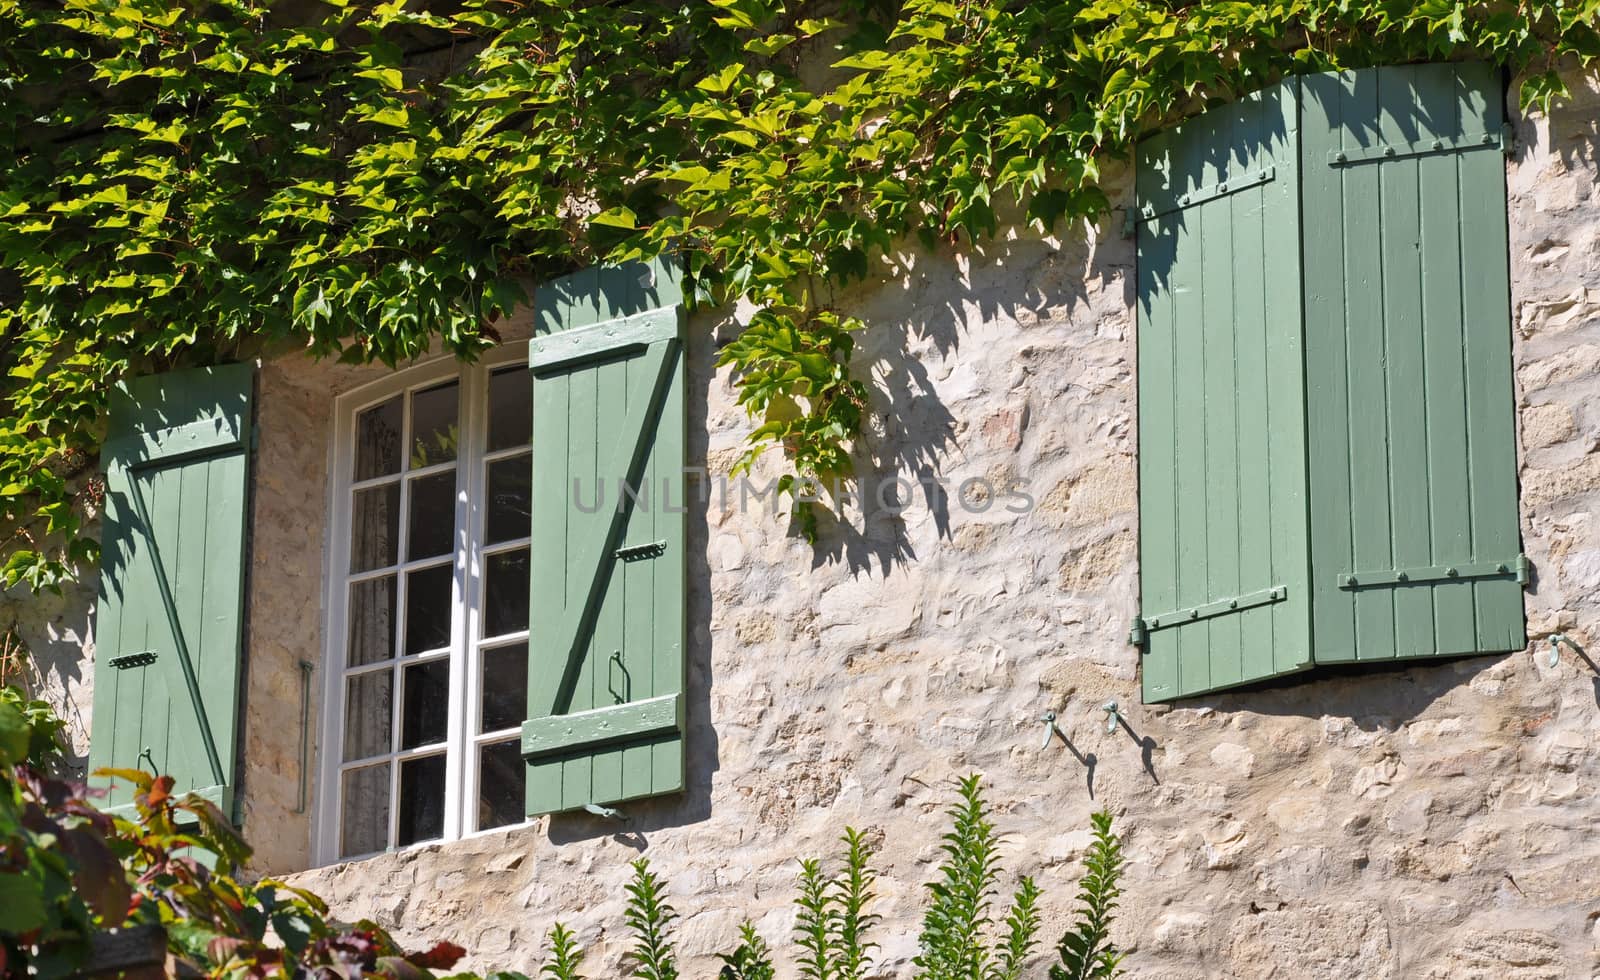 A cottage with green shutters in a Vaison-la-Romaine, in Provence, France.